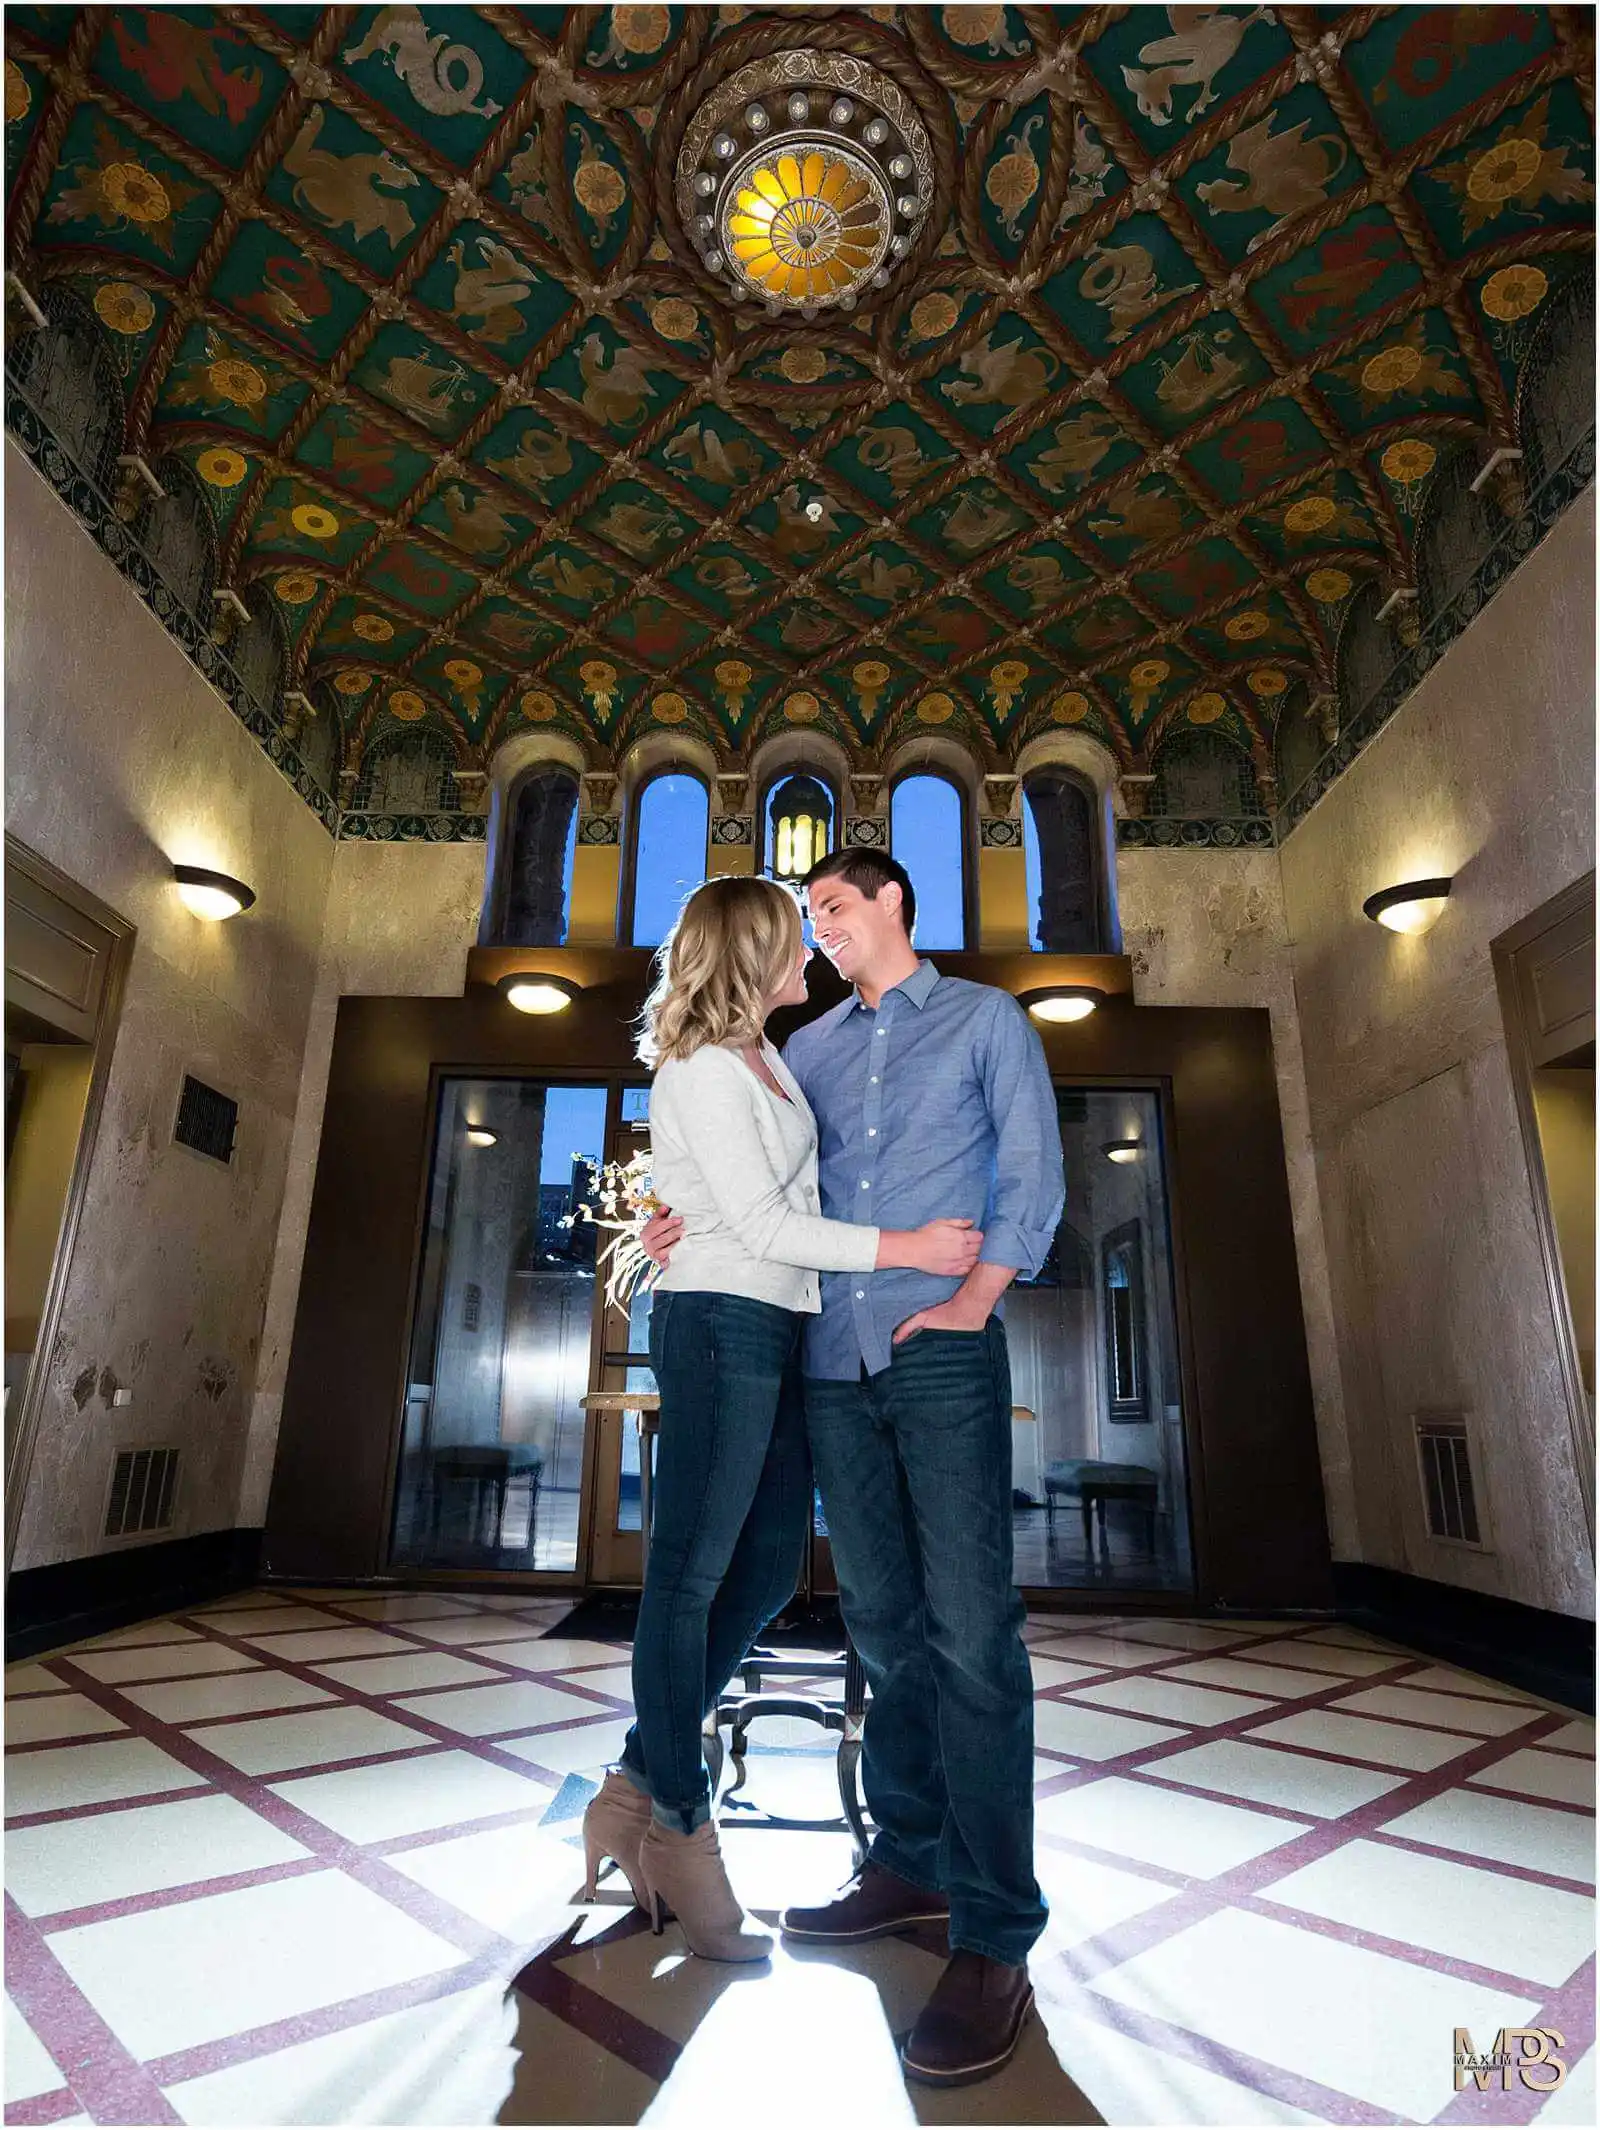 Loving couple embracing in a luxurious Art Deco interior.